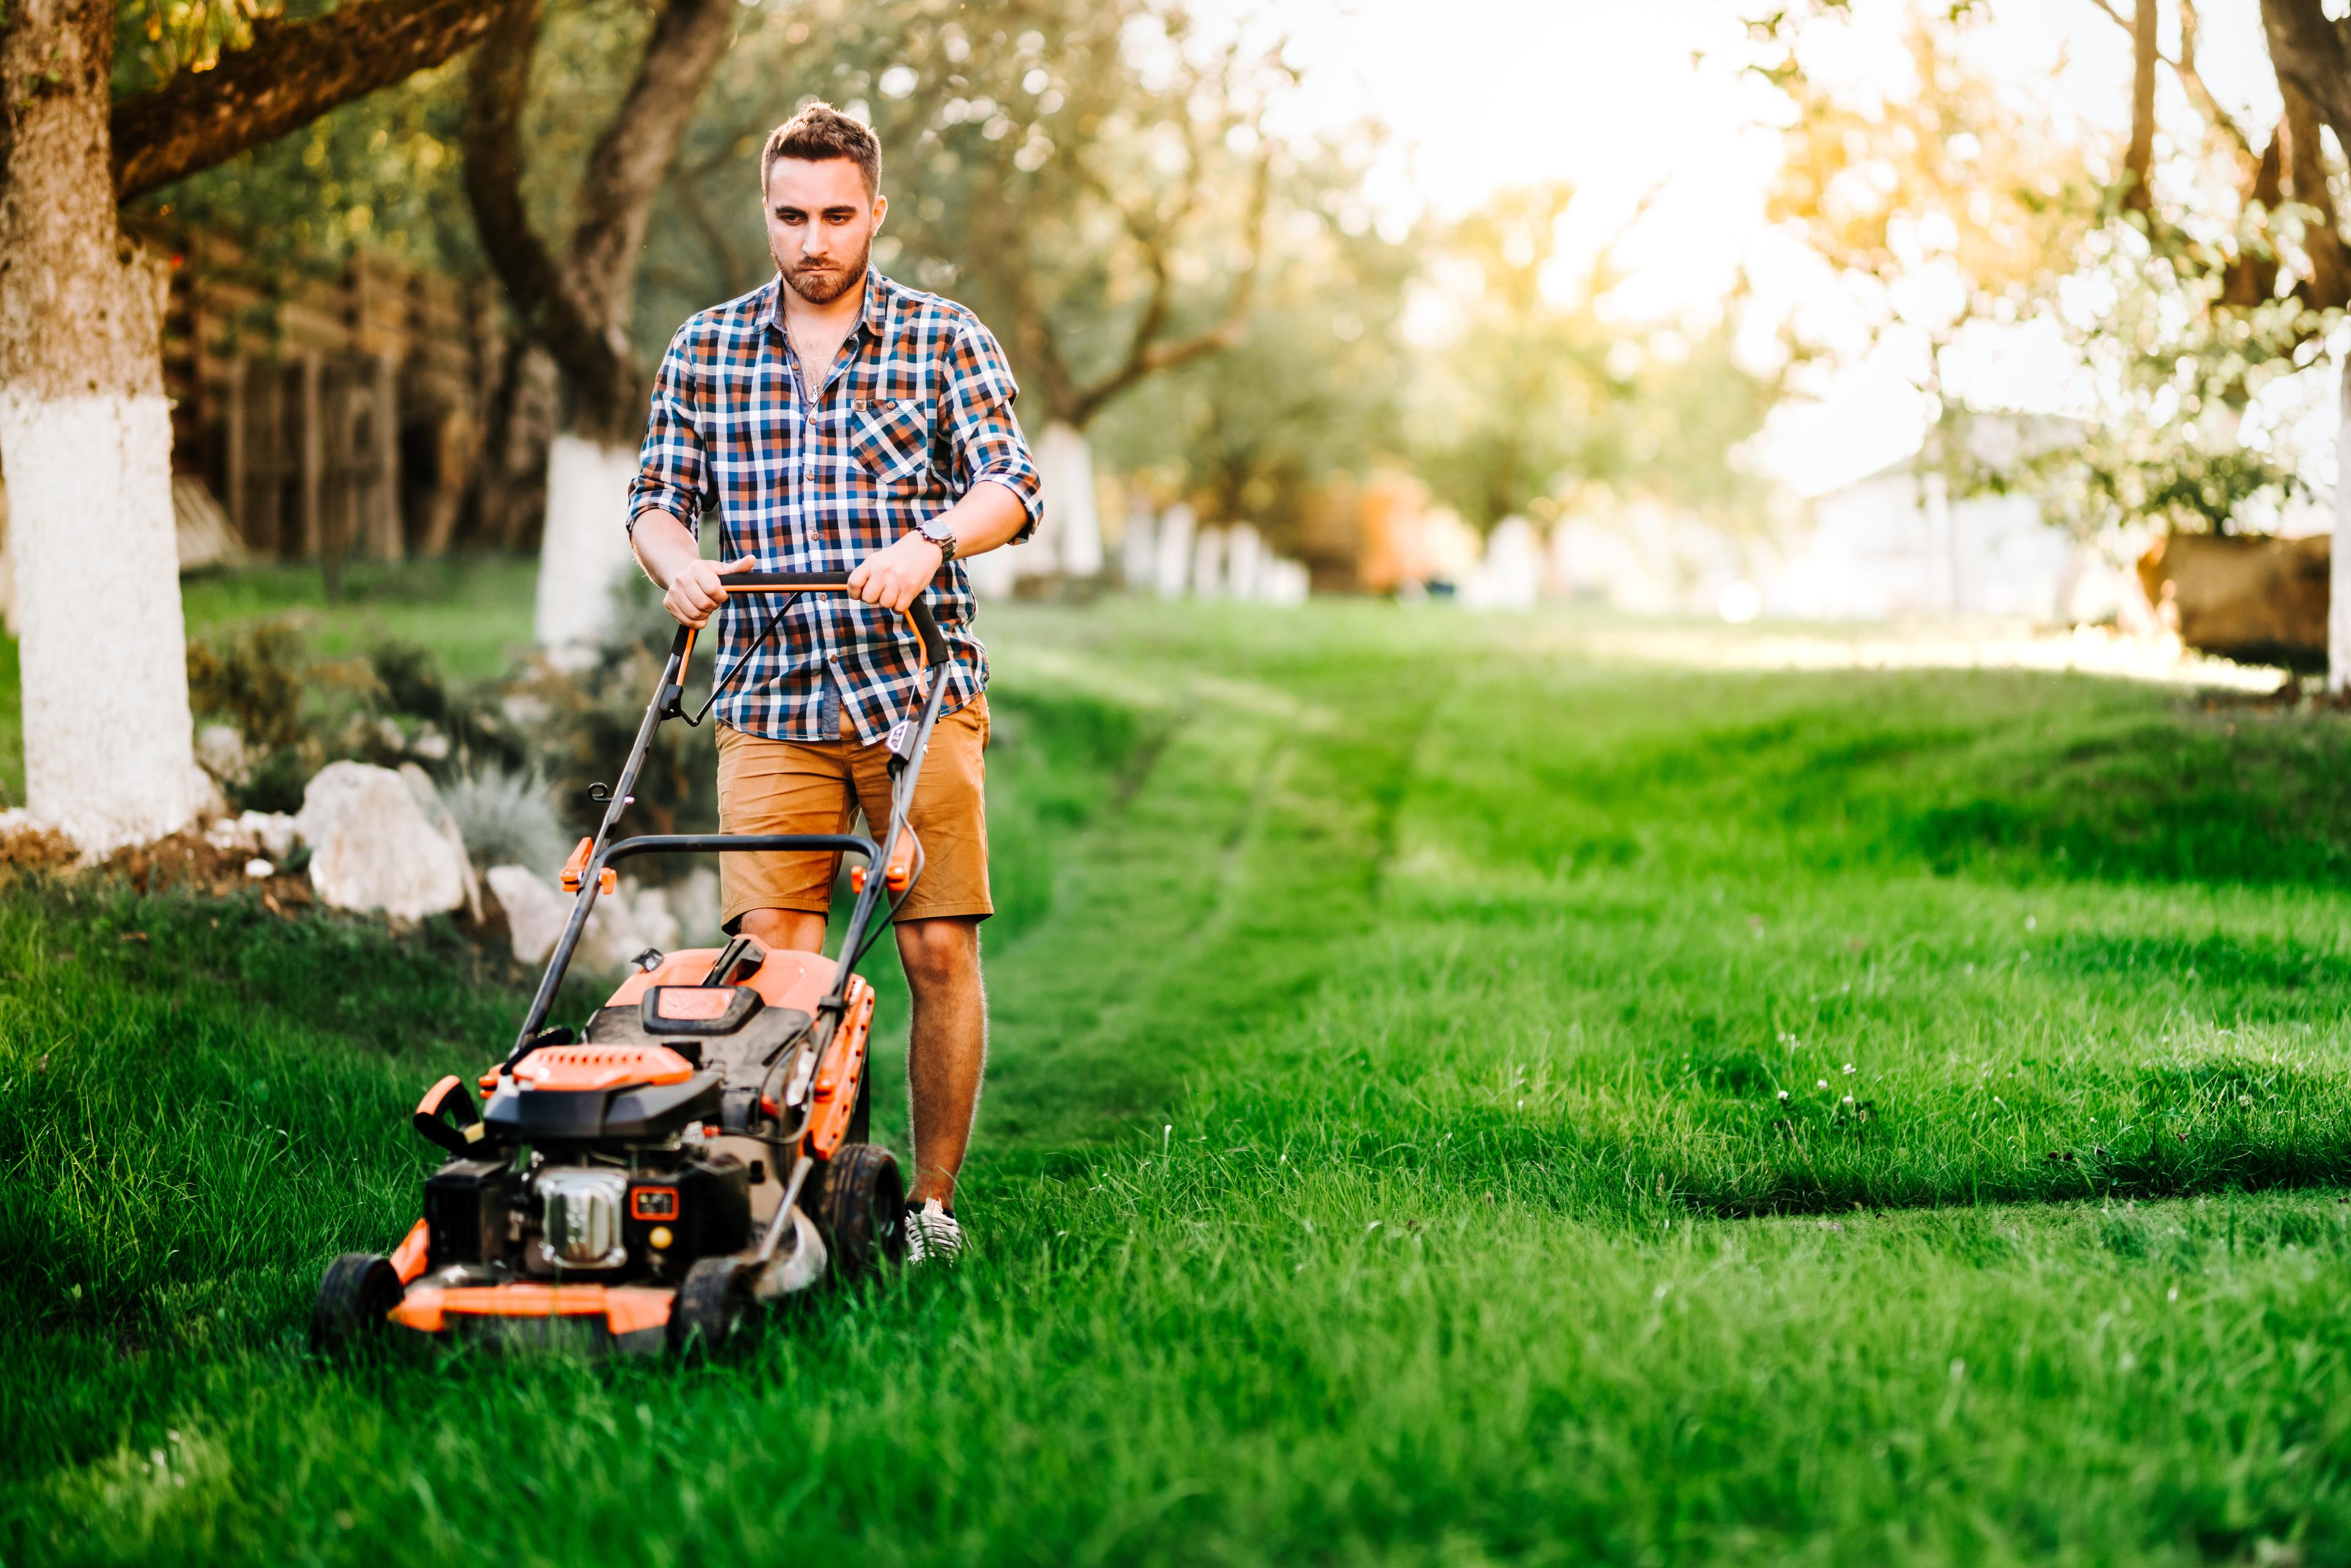 With a determined expression, a person mows their lawn, showcasing the satisfaction that comes from maintaining a well-groomed yard.